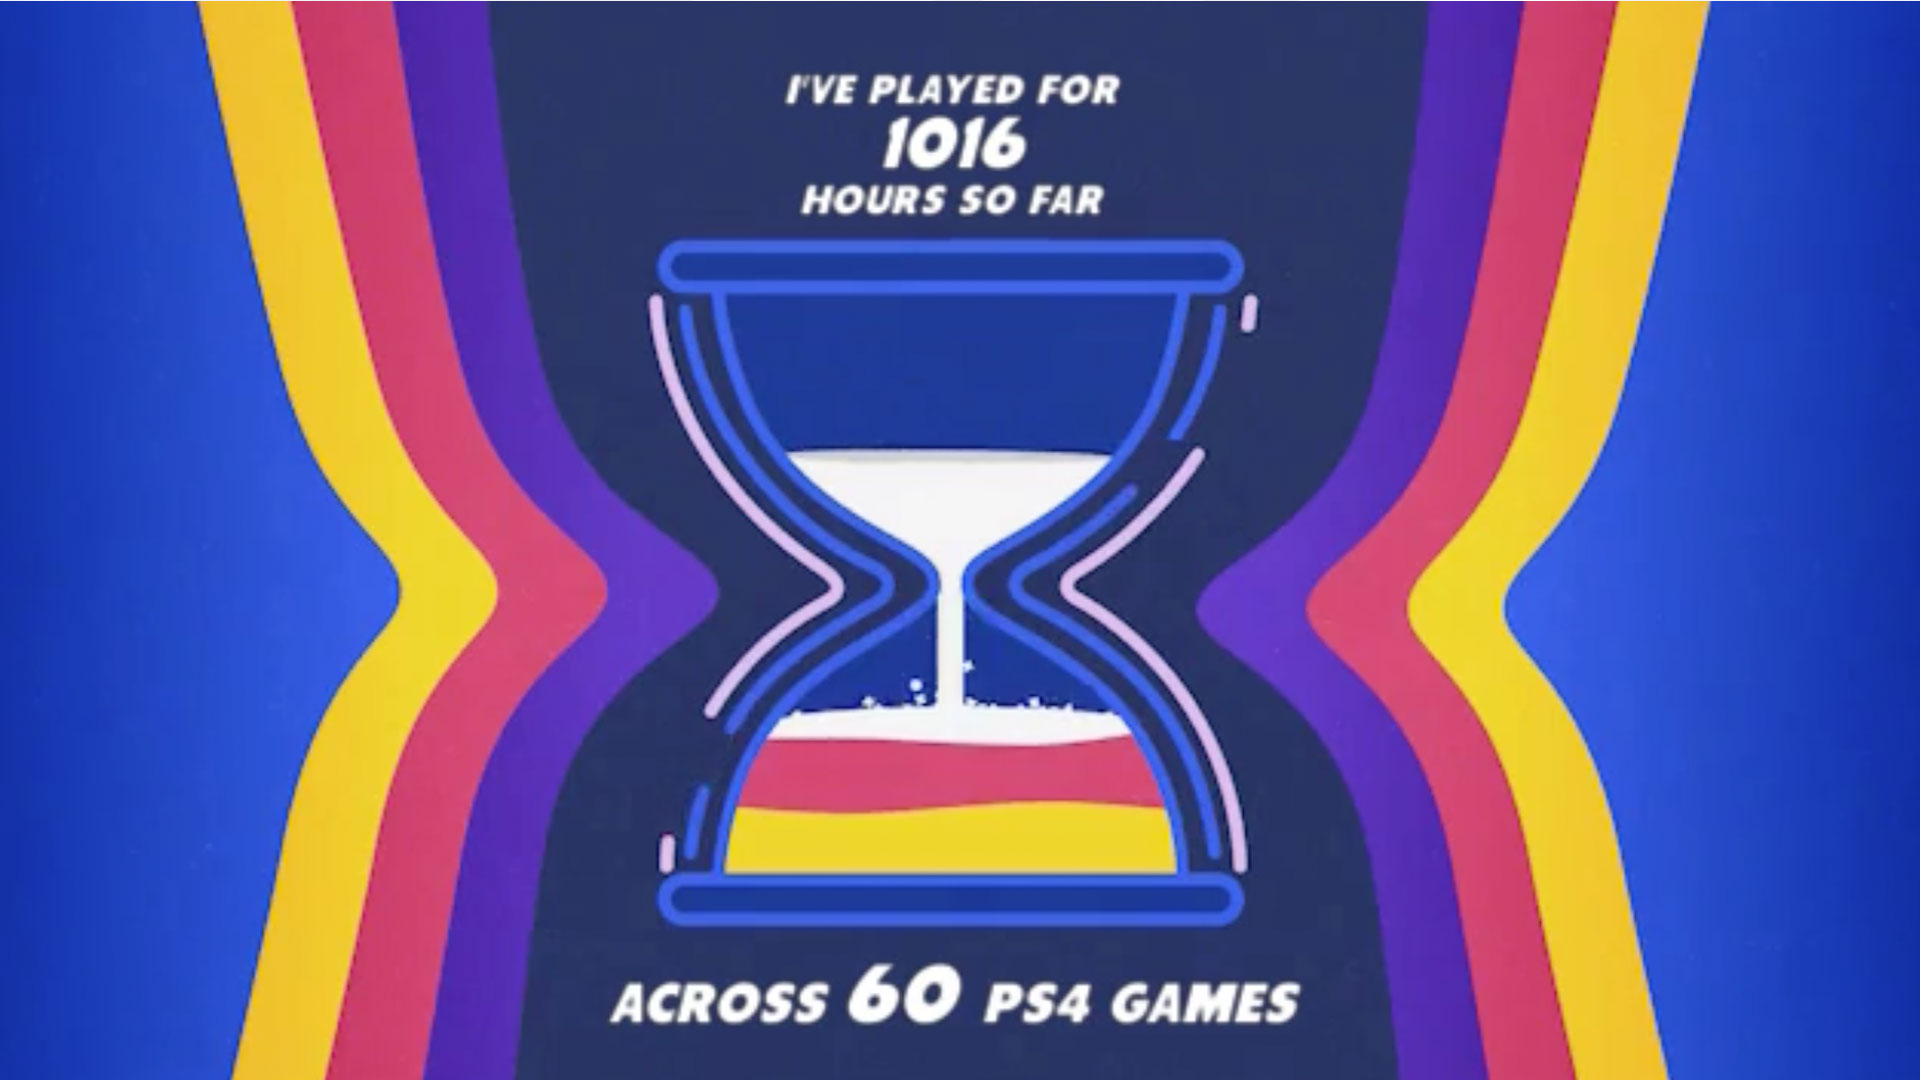 Sony's PS4 Life shows you how many hours you've spent playing PS4 this | GamesRadar+